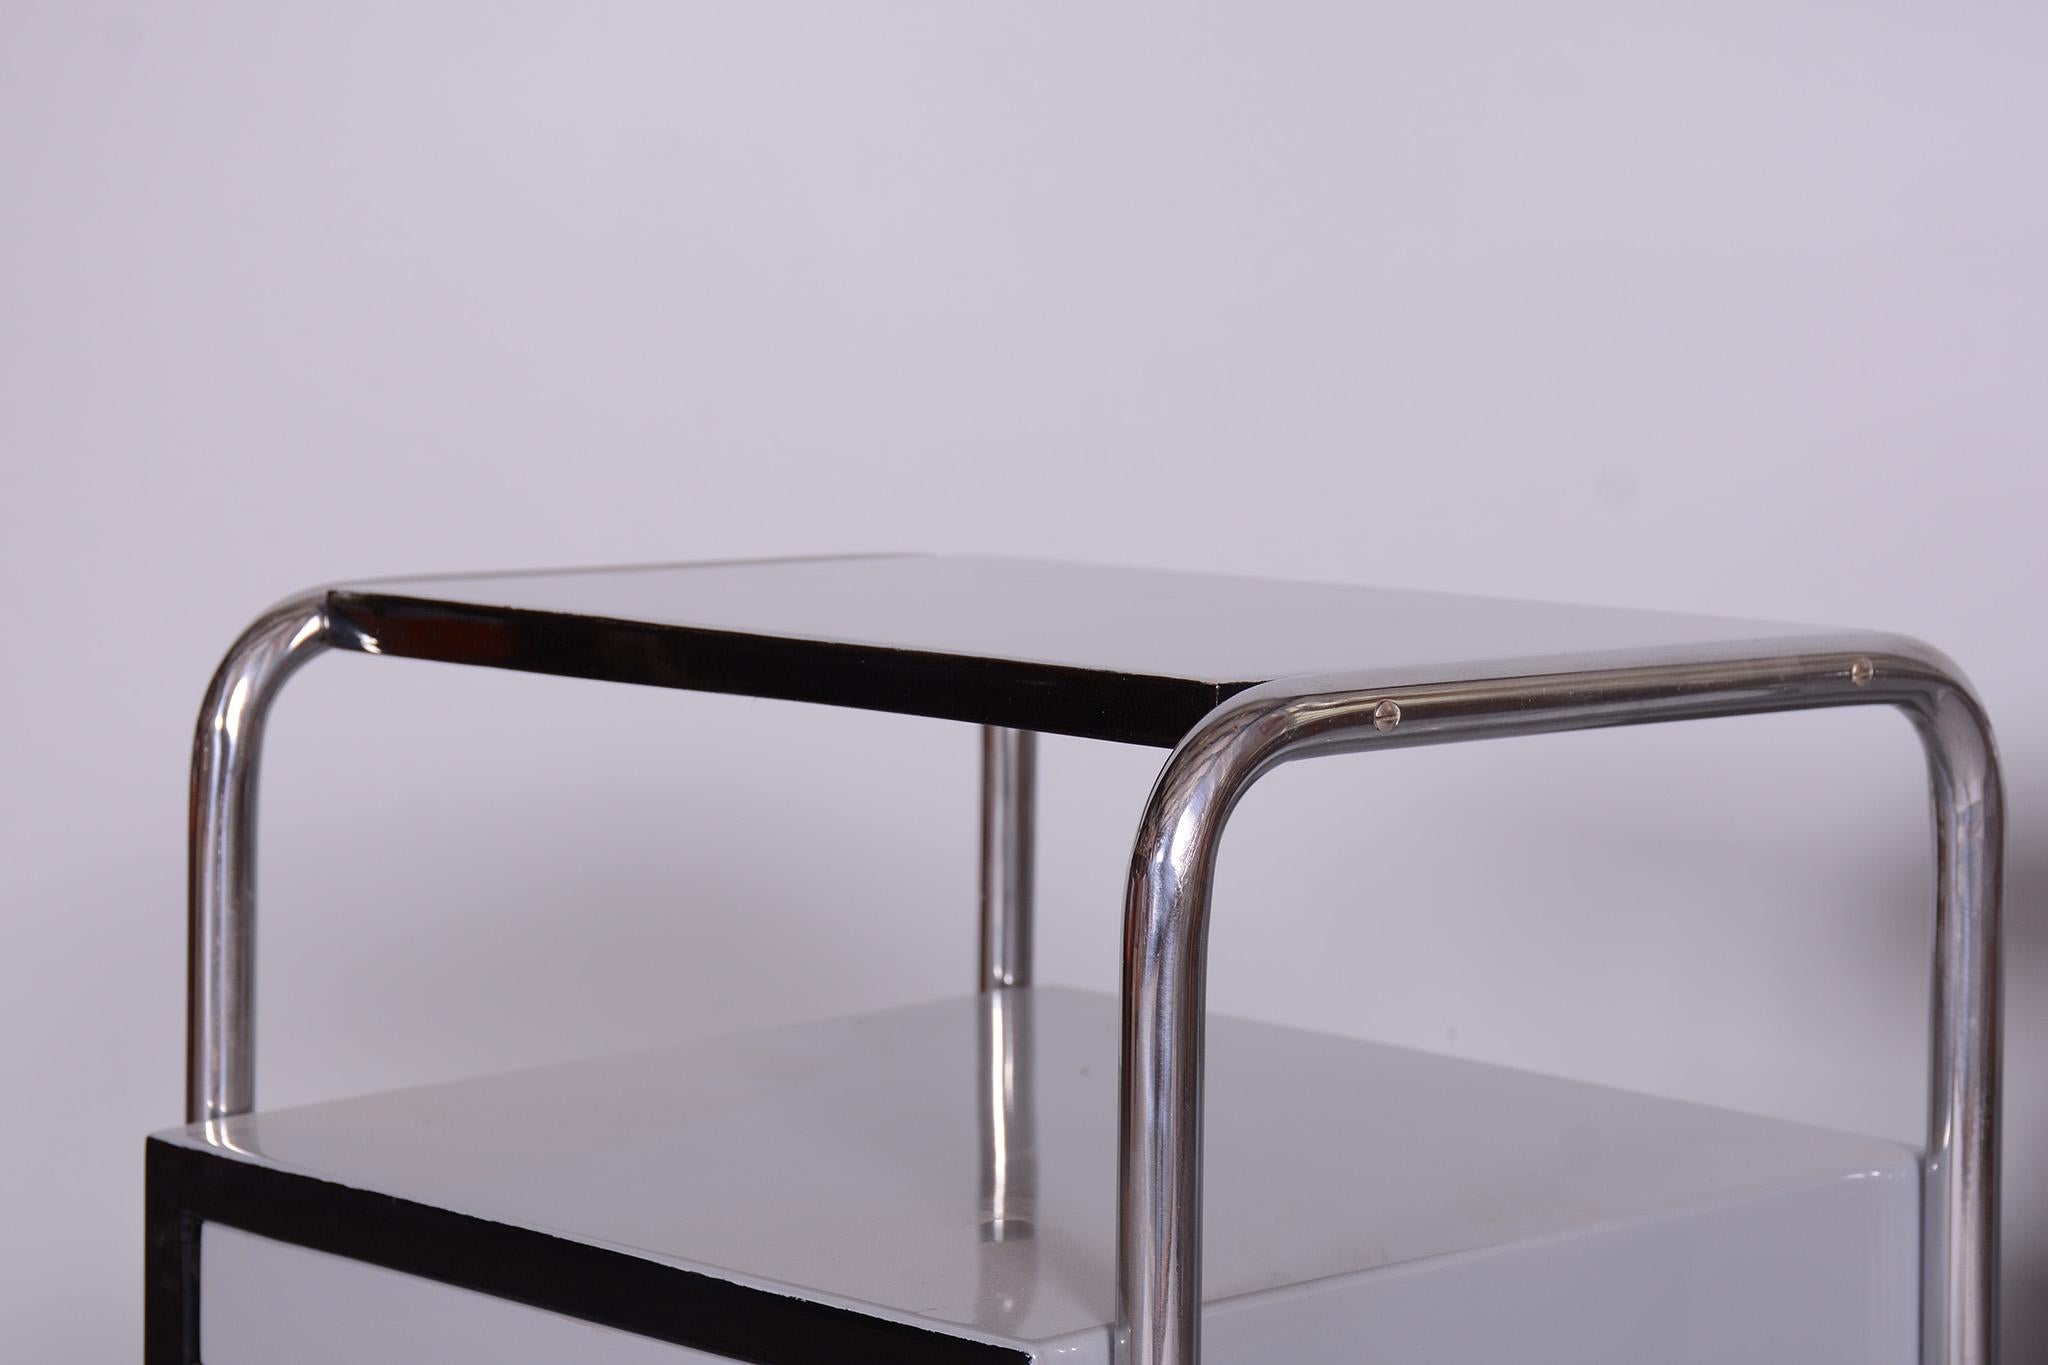 Restored Bed-Side Tables, Vichr a Spol, Chrome-Plated Steel, Czechia, 1930s In Good Condition For Sale In Horomerice, CZ